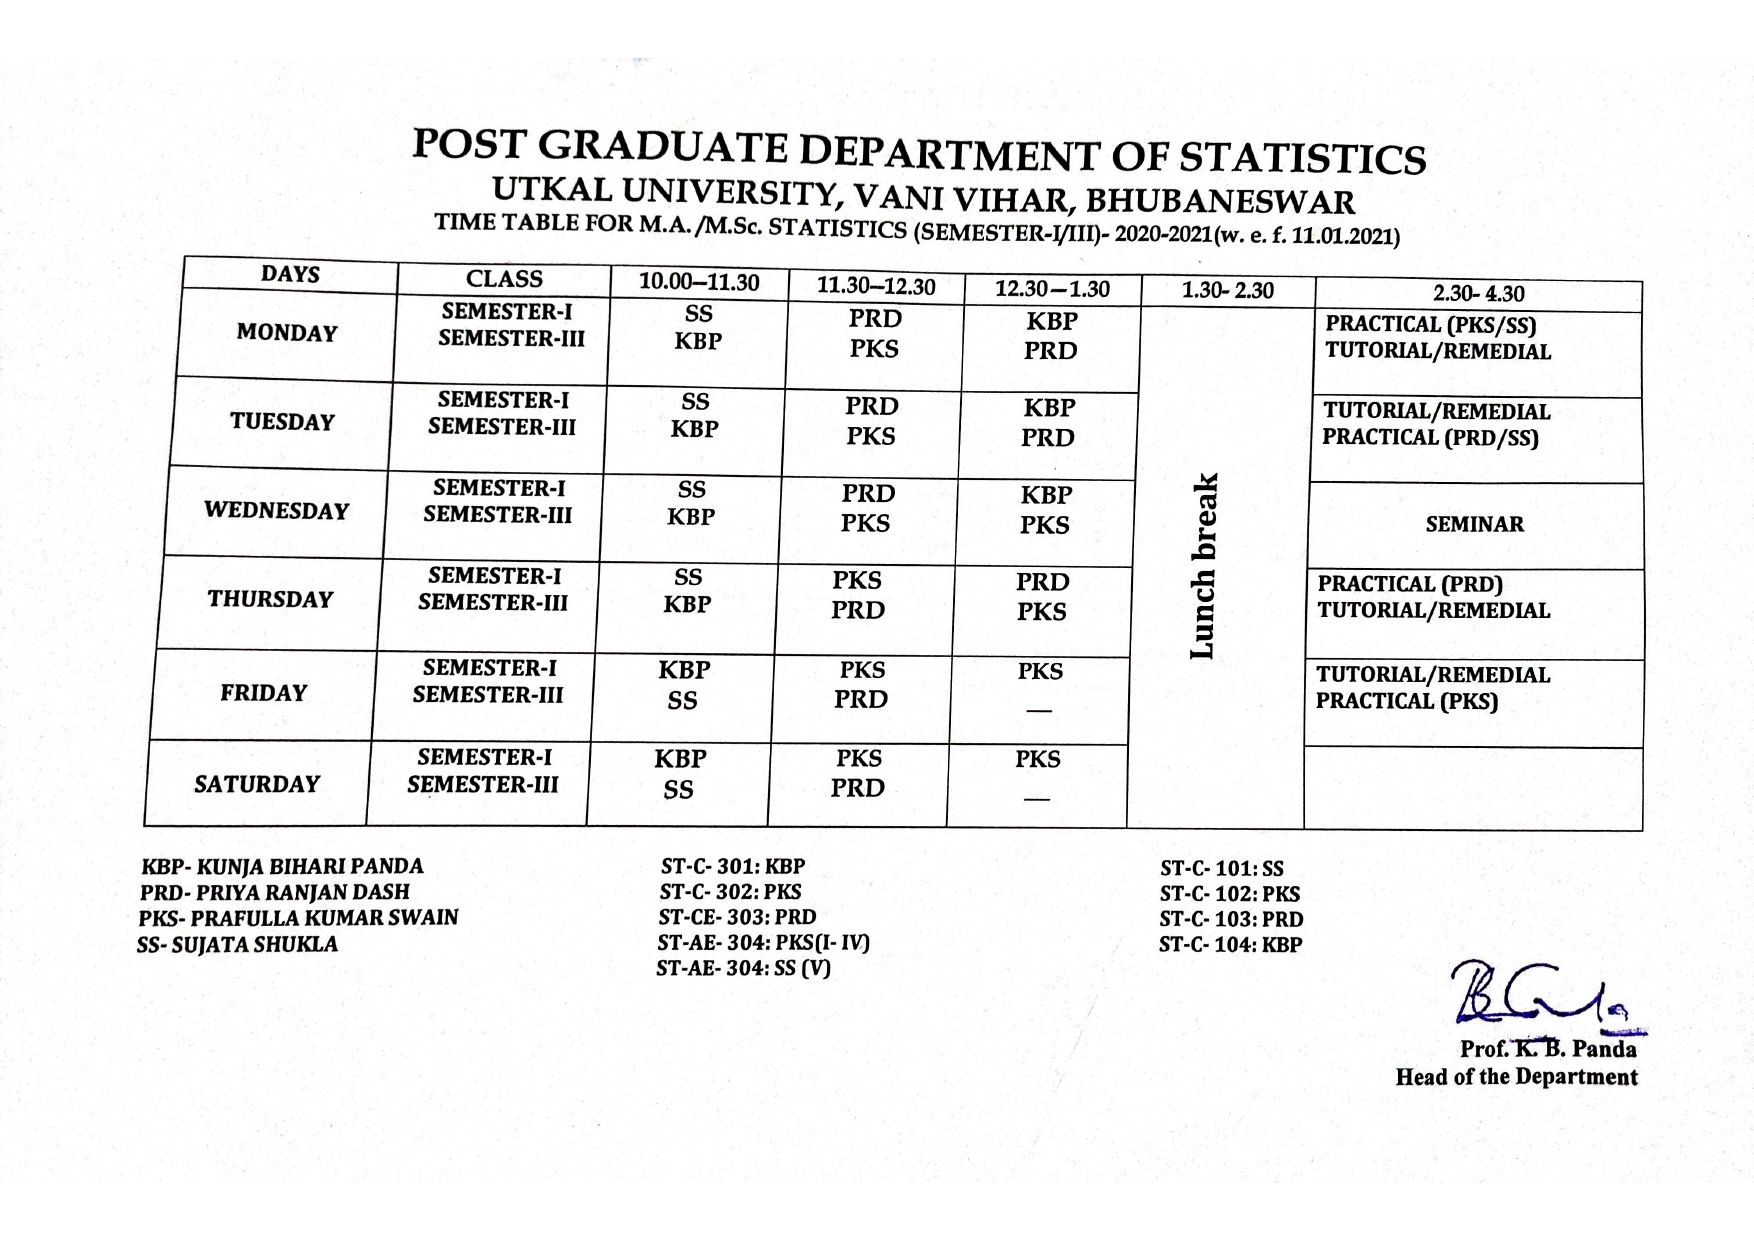 Time Table for M.A. M.Sc 1st & 3rd Sem 2020-21